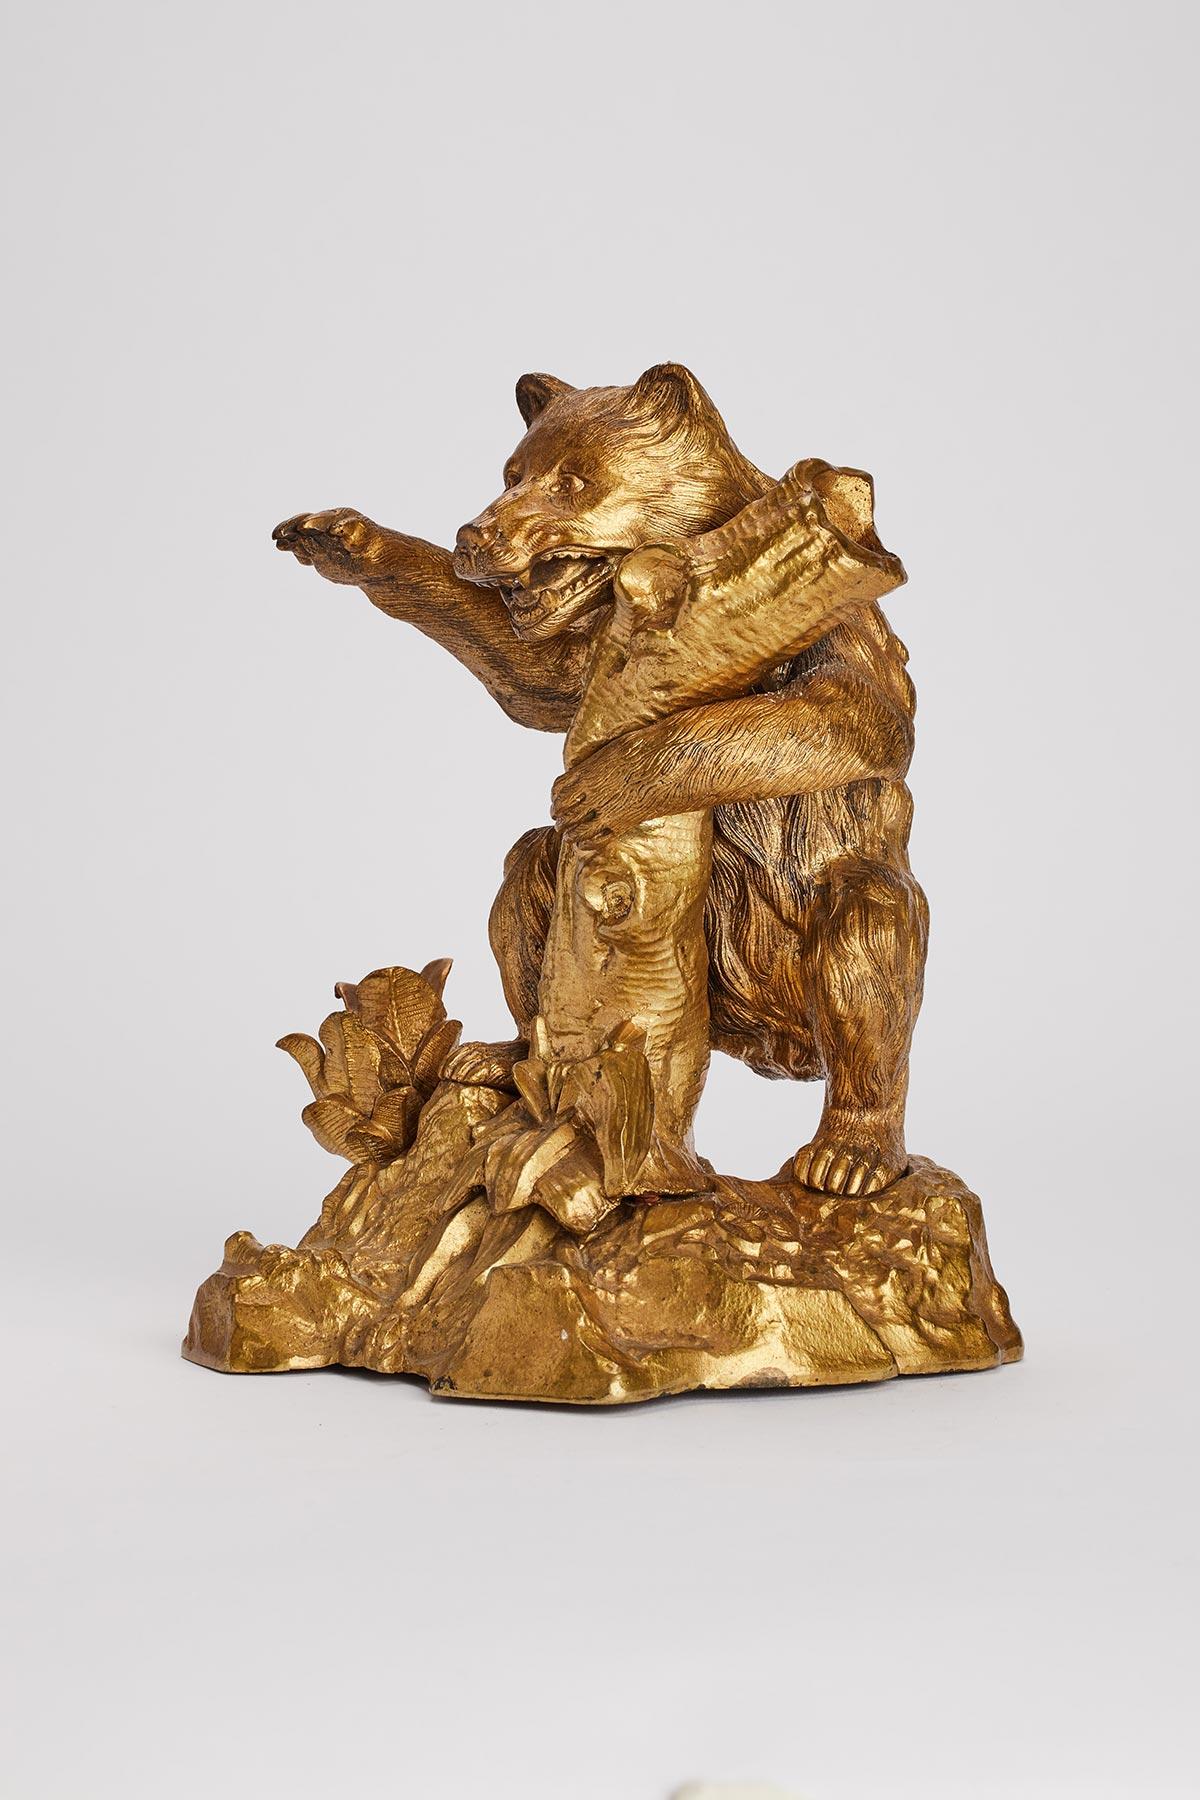 Inkwell gold guild bronze sculpture depicting a bear that is leaning on a tree trunk. Russia, 1880 ca.